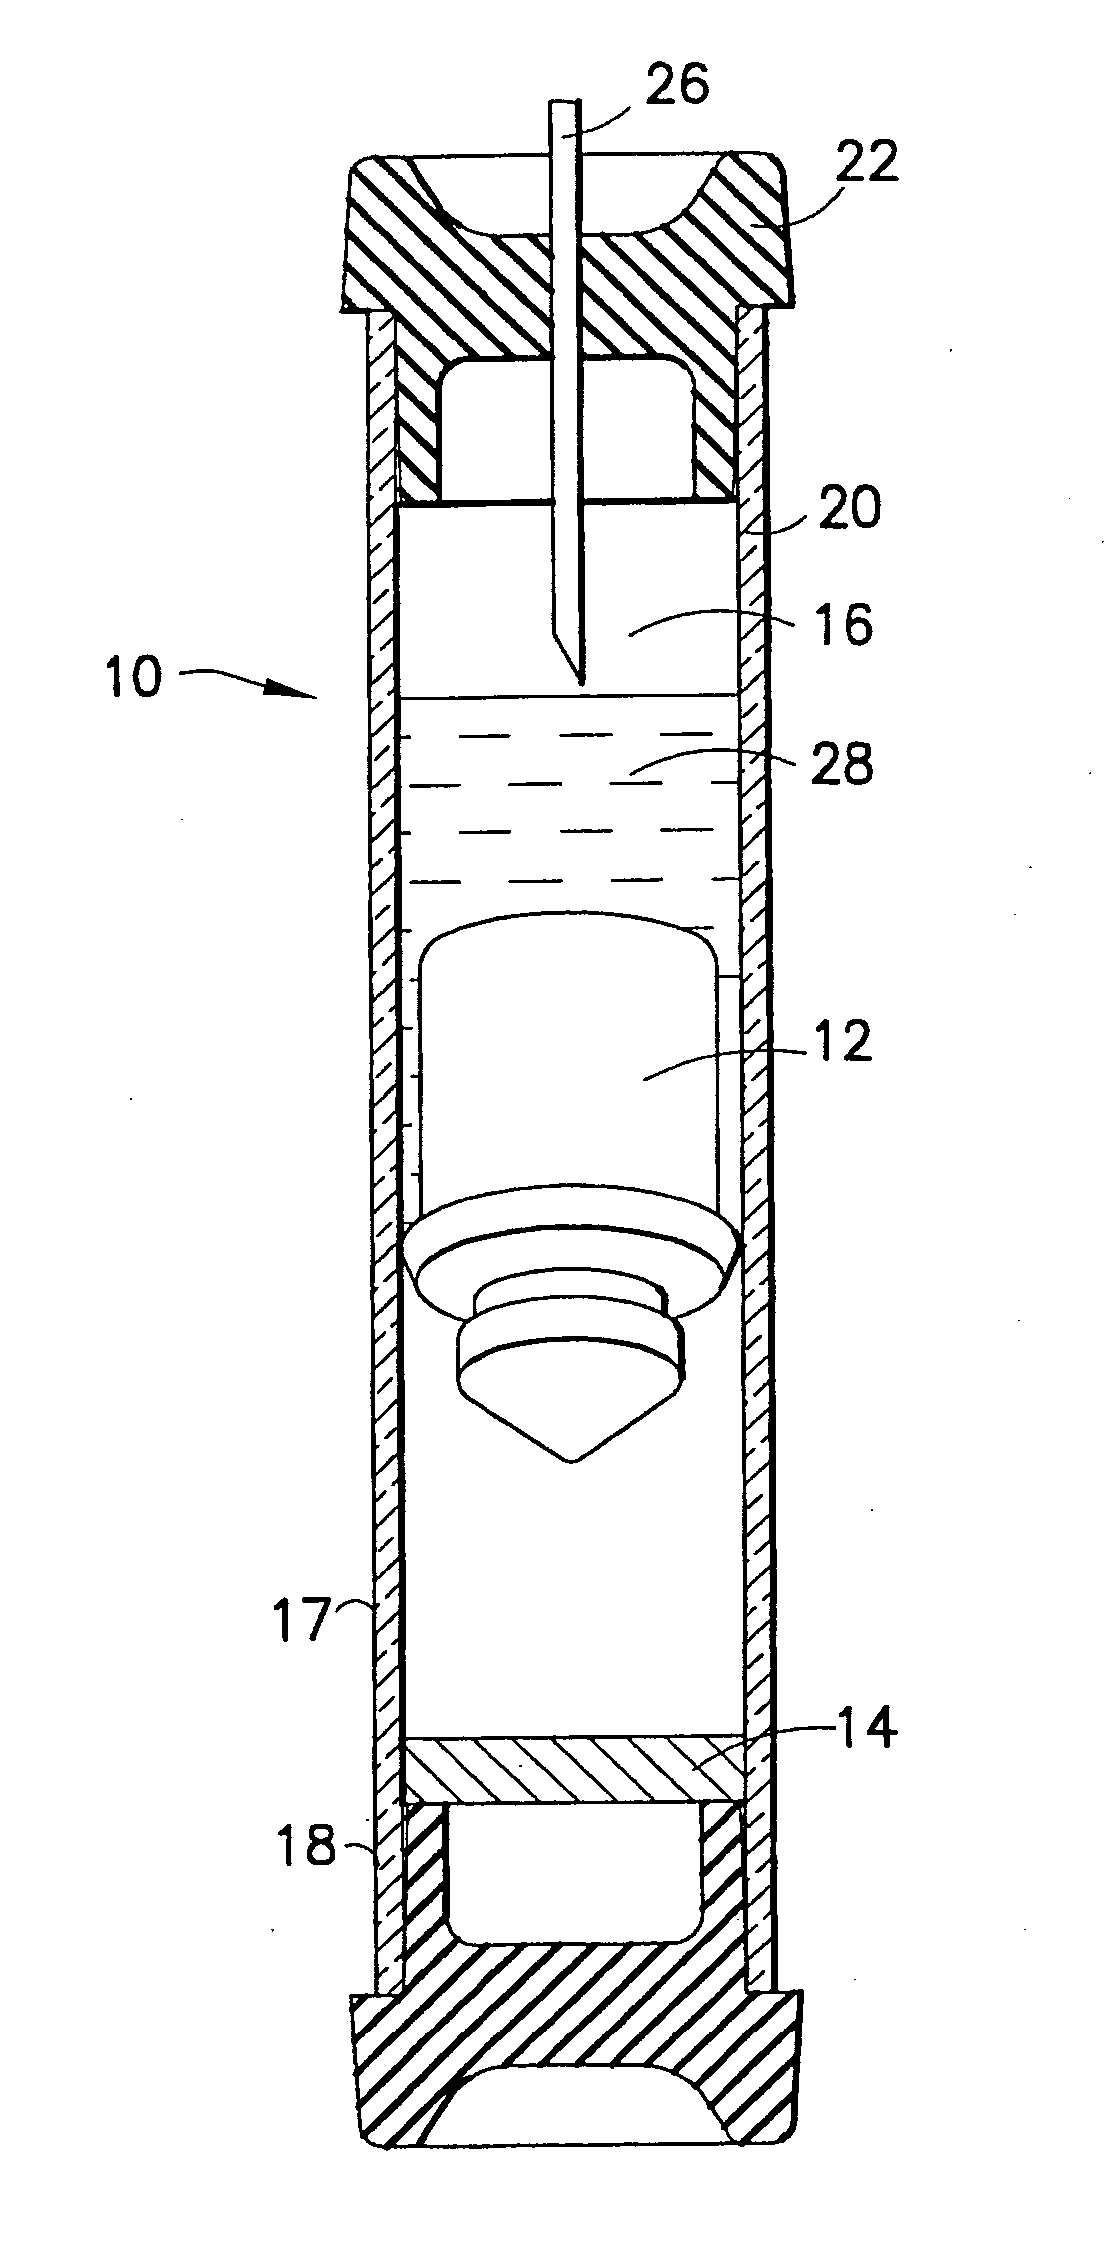 Device and methods for collection of biological fluid sample and treatment of selected components